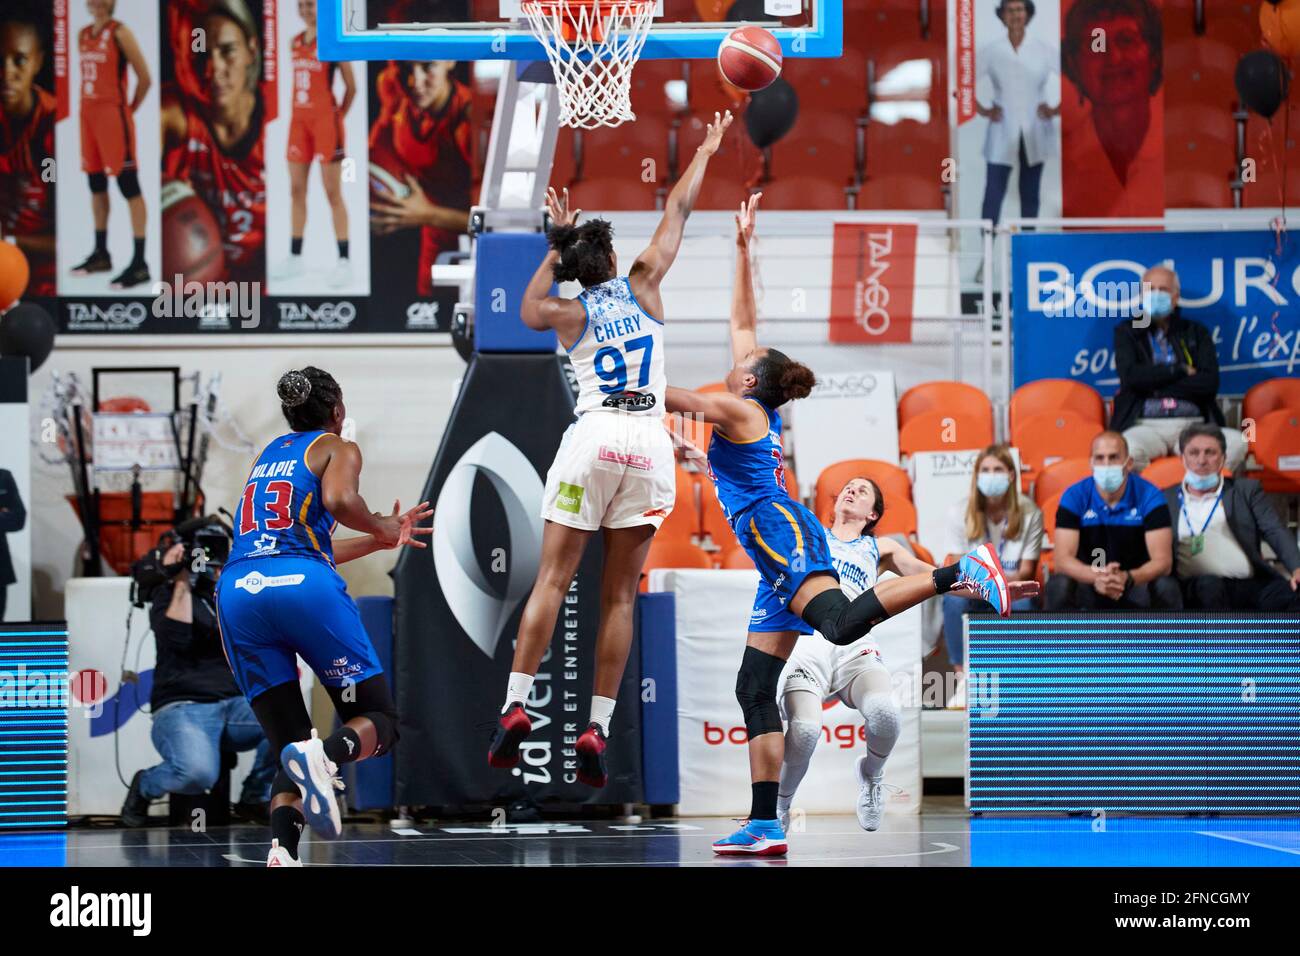 CHERY Kendra (97) of Basket Landes during the Women's French championship,  LFB Playoffs Final basketball match between Basket Landes and Basket Lattes  Montpellier on May 15, 2021 at Palais des Sports du